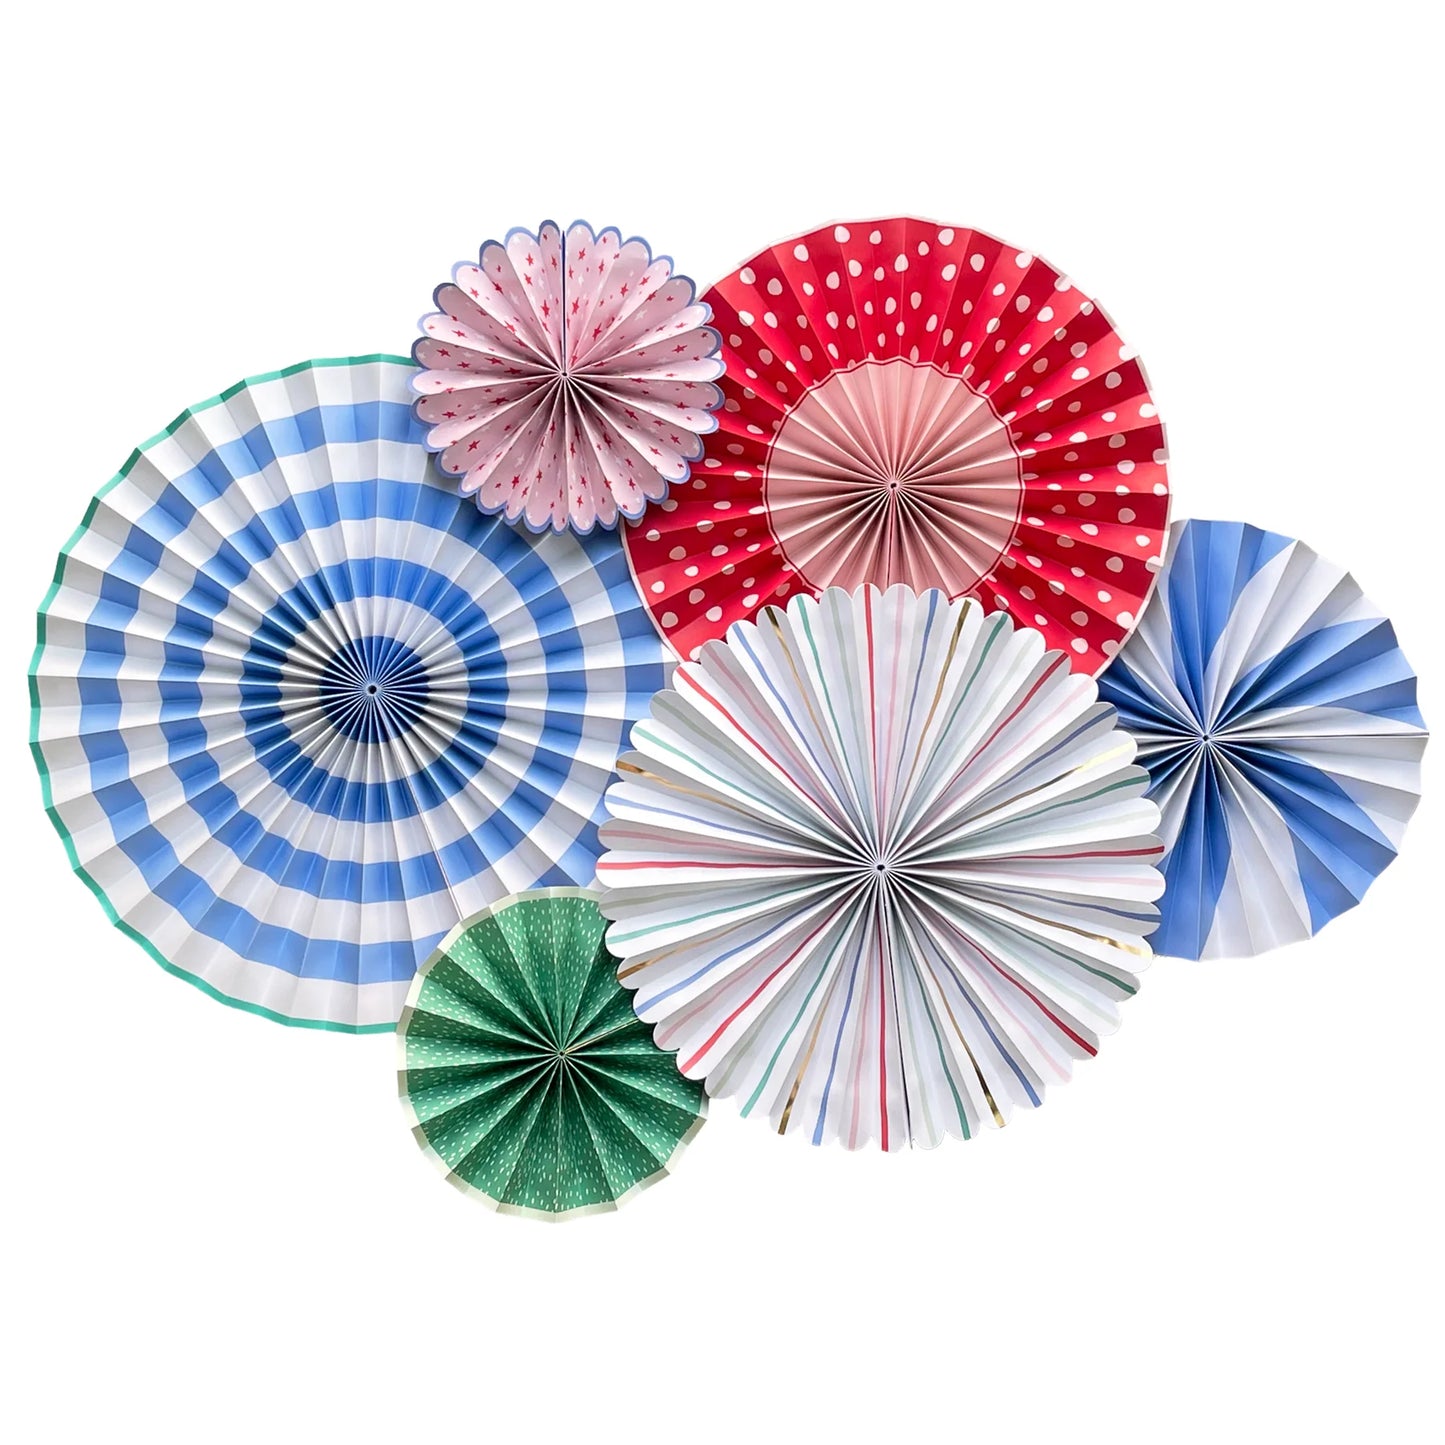 Set of 6 Party Fans: Oui Party Birthday Party Fans